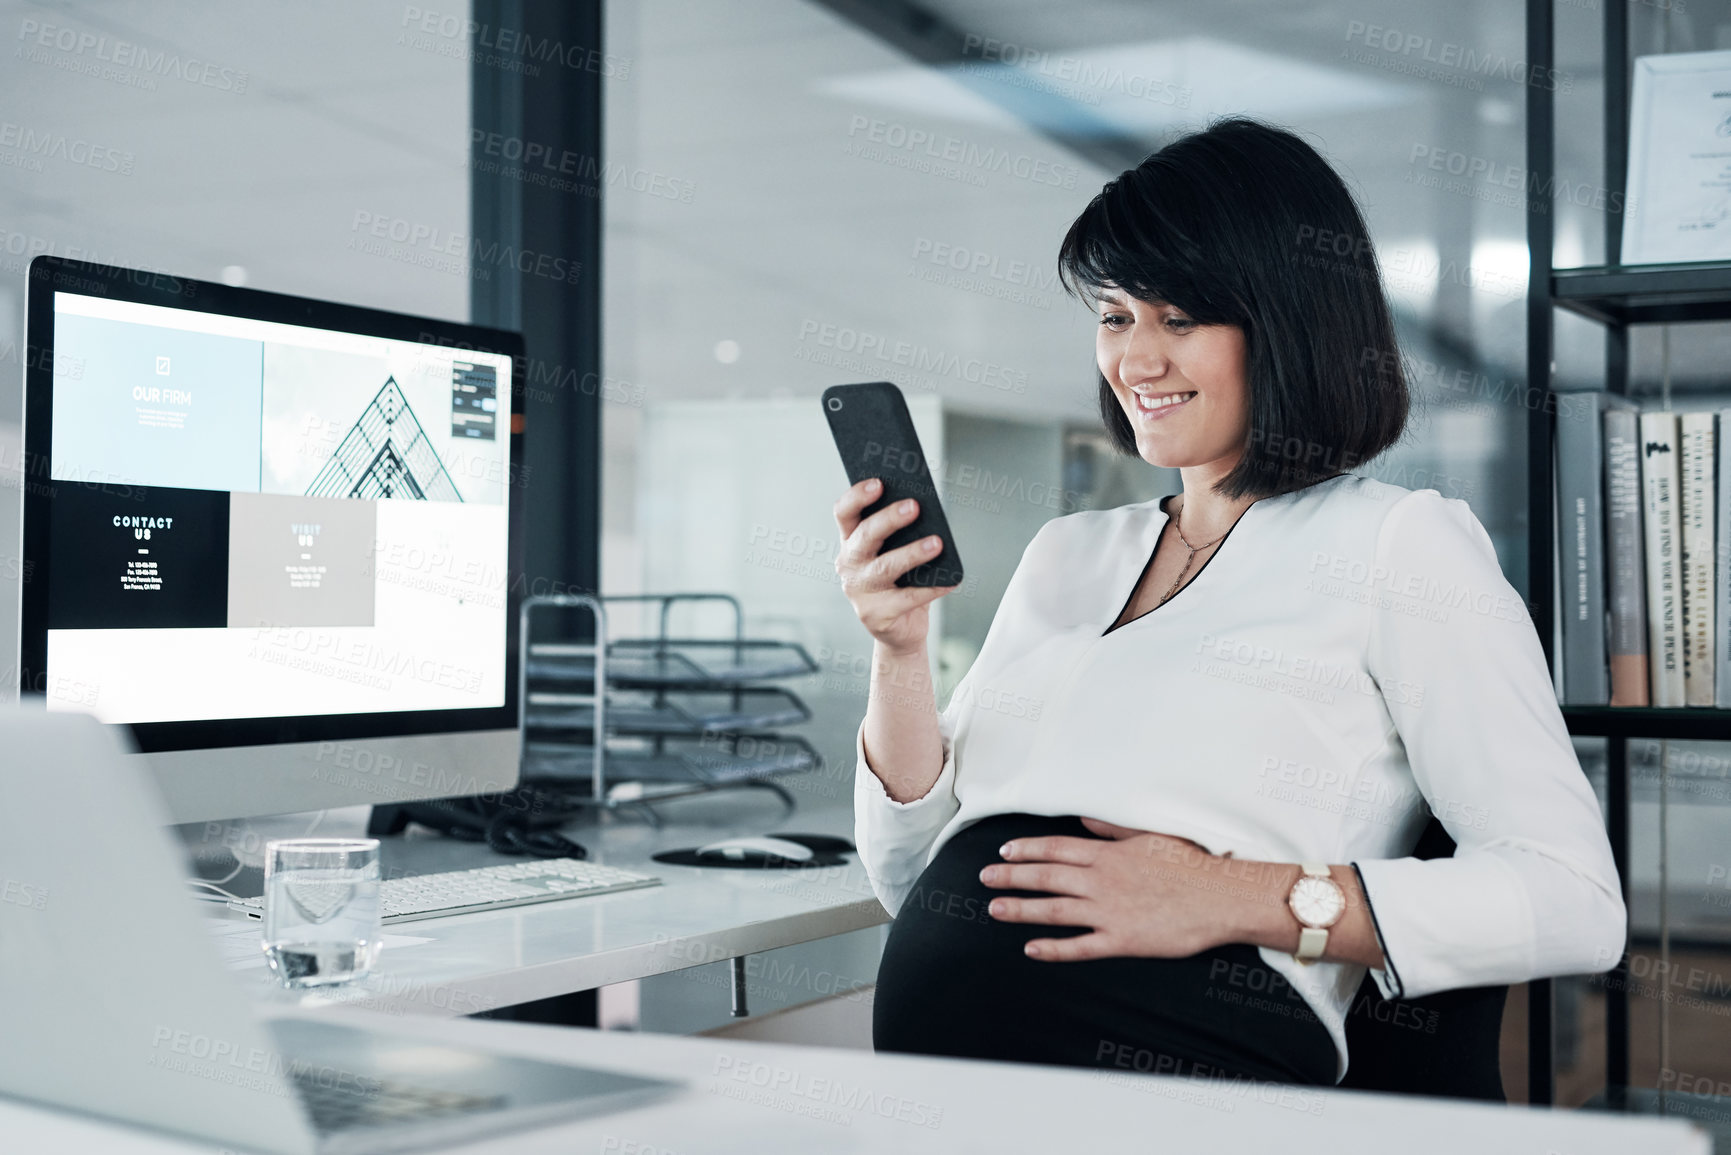 Buy stock photo Cropped shot of an attractive pregnant businesswoman sitting alone in the office and using her cellphone